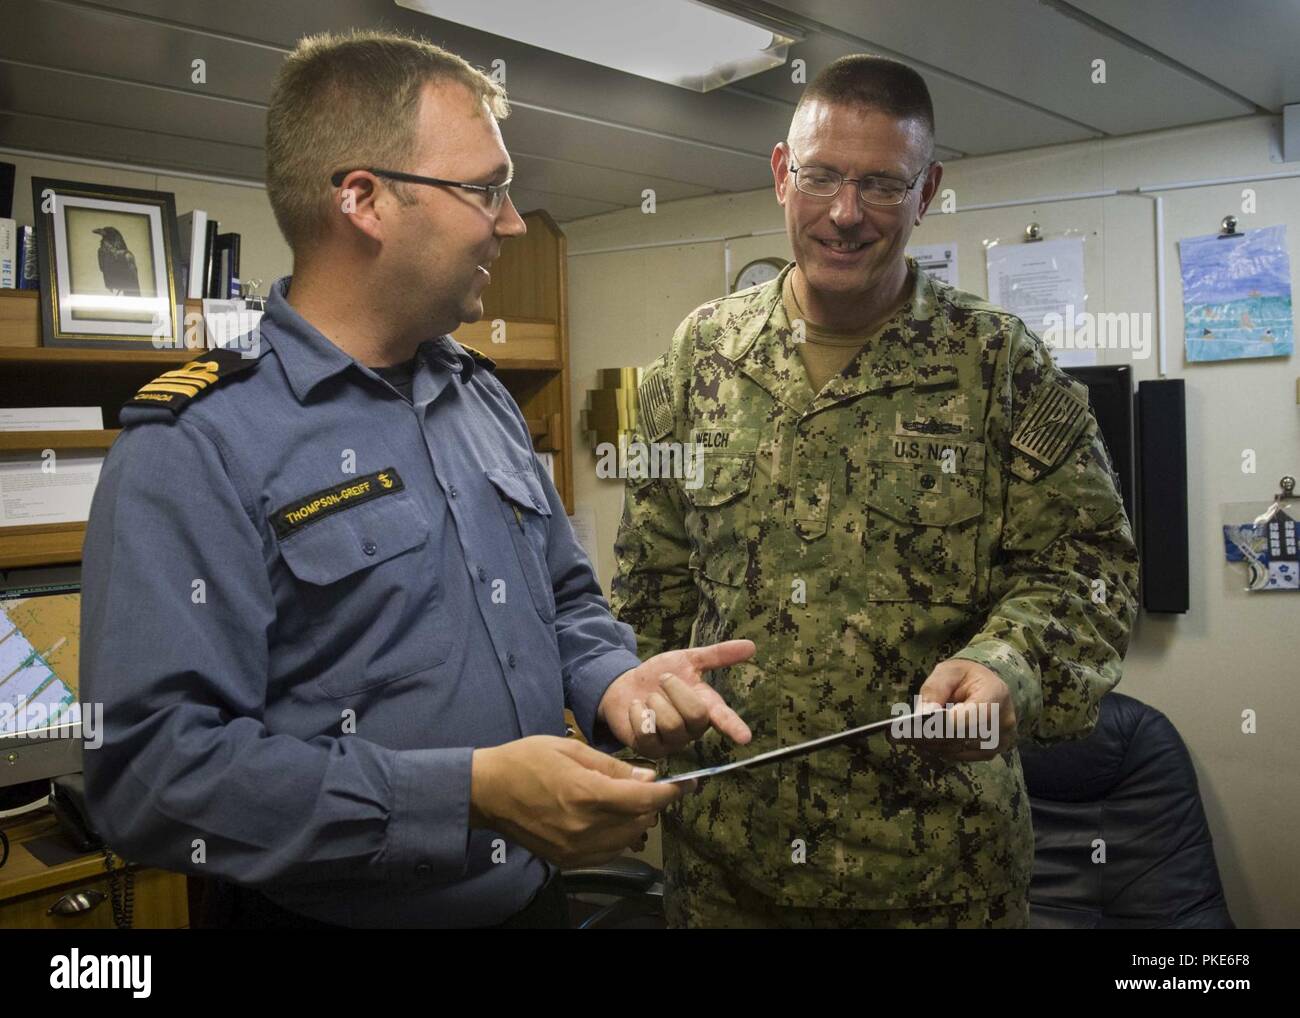 SAN DIEGO (July 26, 2018) Lt. Cmdr. Donald Thompson-Greiff, commanding officer of the Royal Canadian Navy coastal defense vessel HMCS Yellowknife (MM 706), shows Rear Adm. Dave Welch, commander, Task Force 177, Naval Surface and Mine Warfighting Development Center (SMWDC), a license plate for the ship, gifted by the city of Yellowknife, during his visit to the ship in support of the Rim of the Pacific (RIMPAC) exercise, July 26. Twenty-five nations, 46 ships, five submarines, about 200 aircraft and 25,000 personnel are participating in RIMPAC from June 27 to Aug. 2 in and around the Hawaiian I Stock Photo